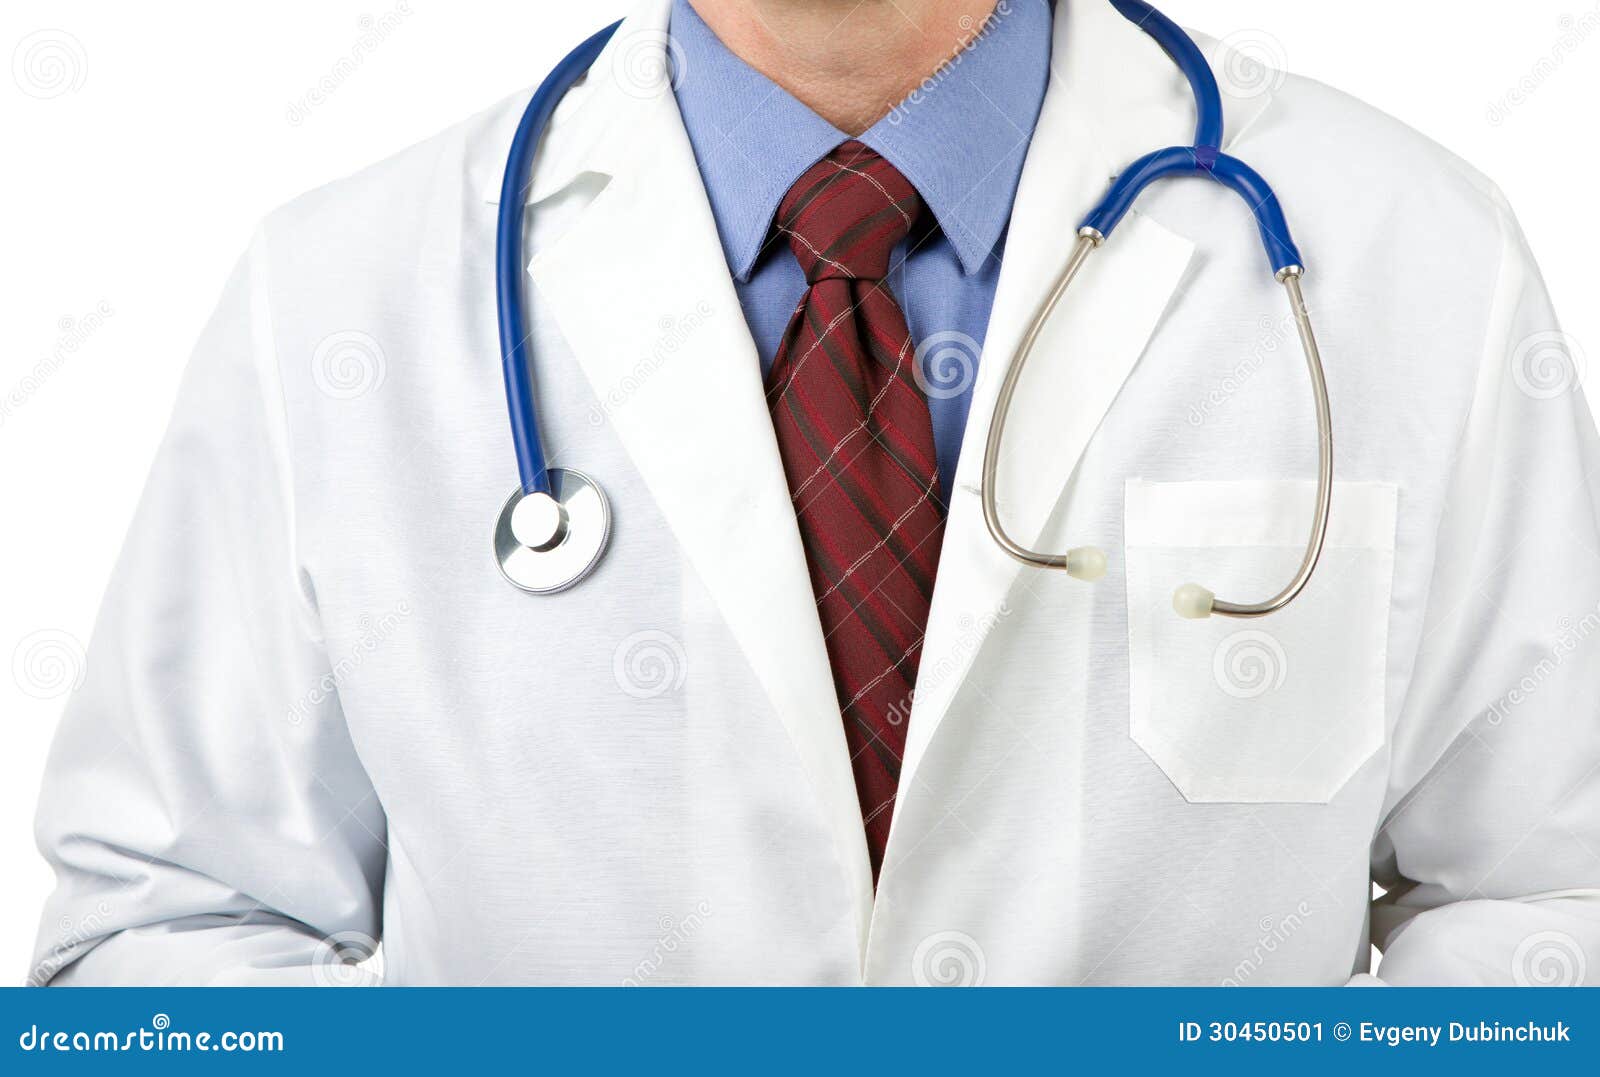 stethoscope on physician